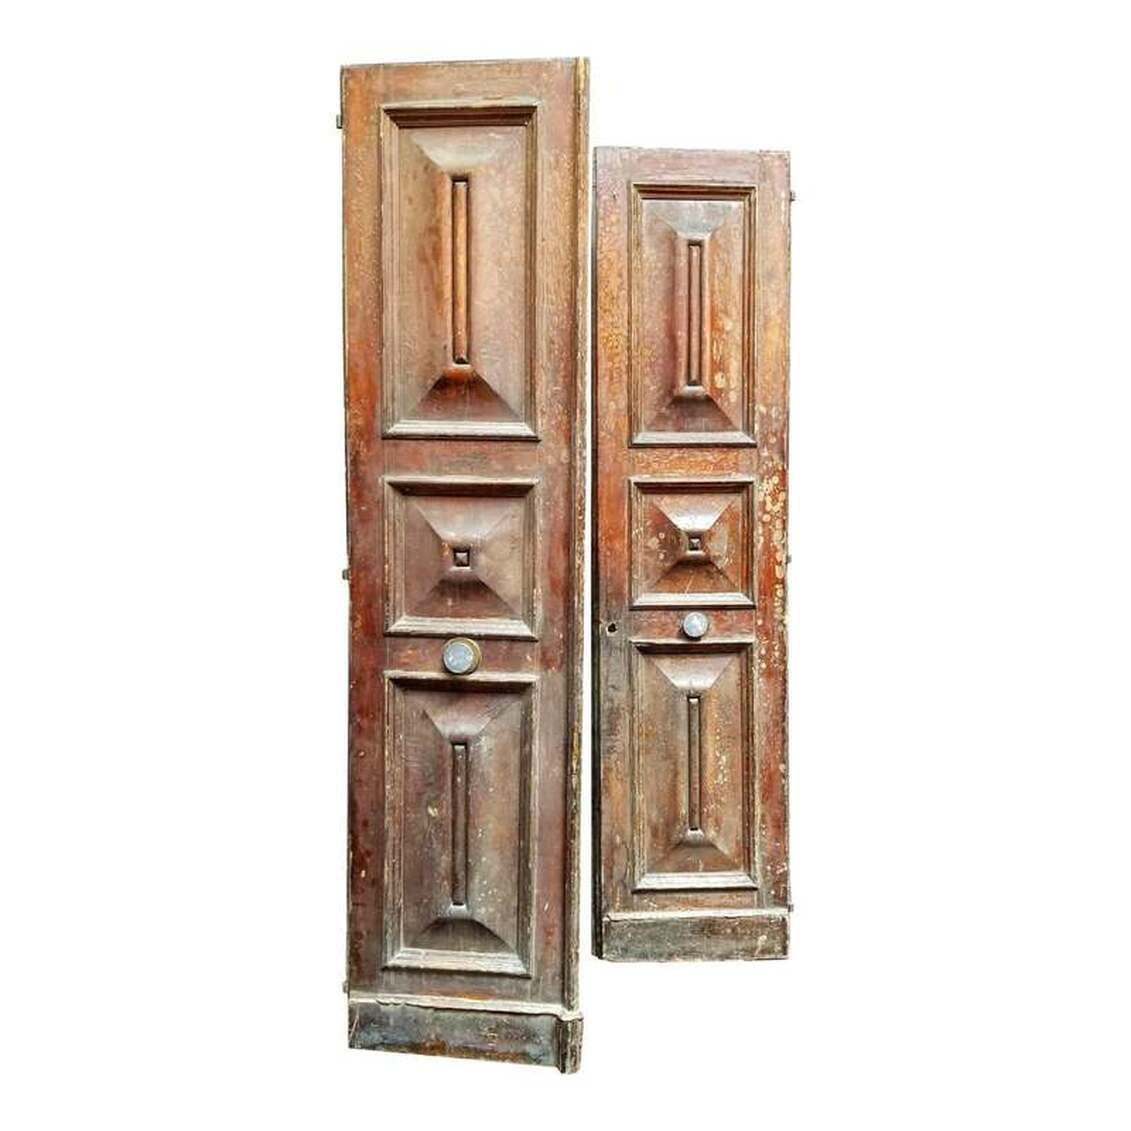 Baron Georges-Eugène Haussmann was appointed by Napoleon III to conduct an urban renewal of Medieval Paris beginning in 1853. The work carried through 1927.  This pair of French oak panel doors date from the late-19th century.  One side shows the original red paint and zinc door pulls. The second side shows the original cream paint.